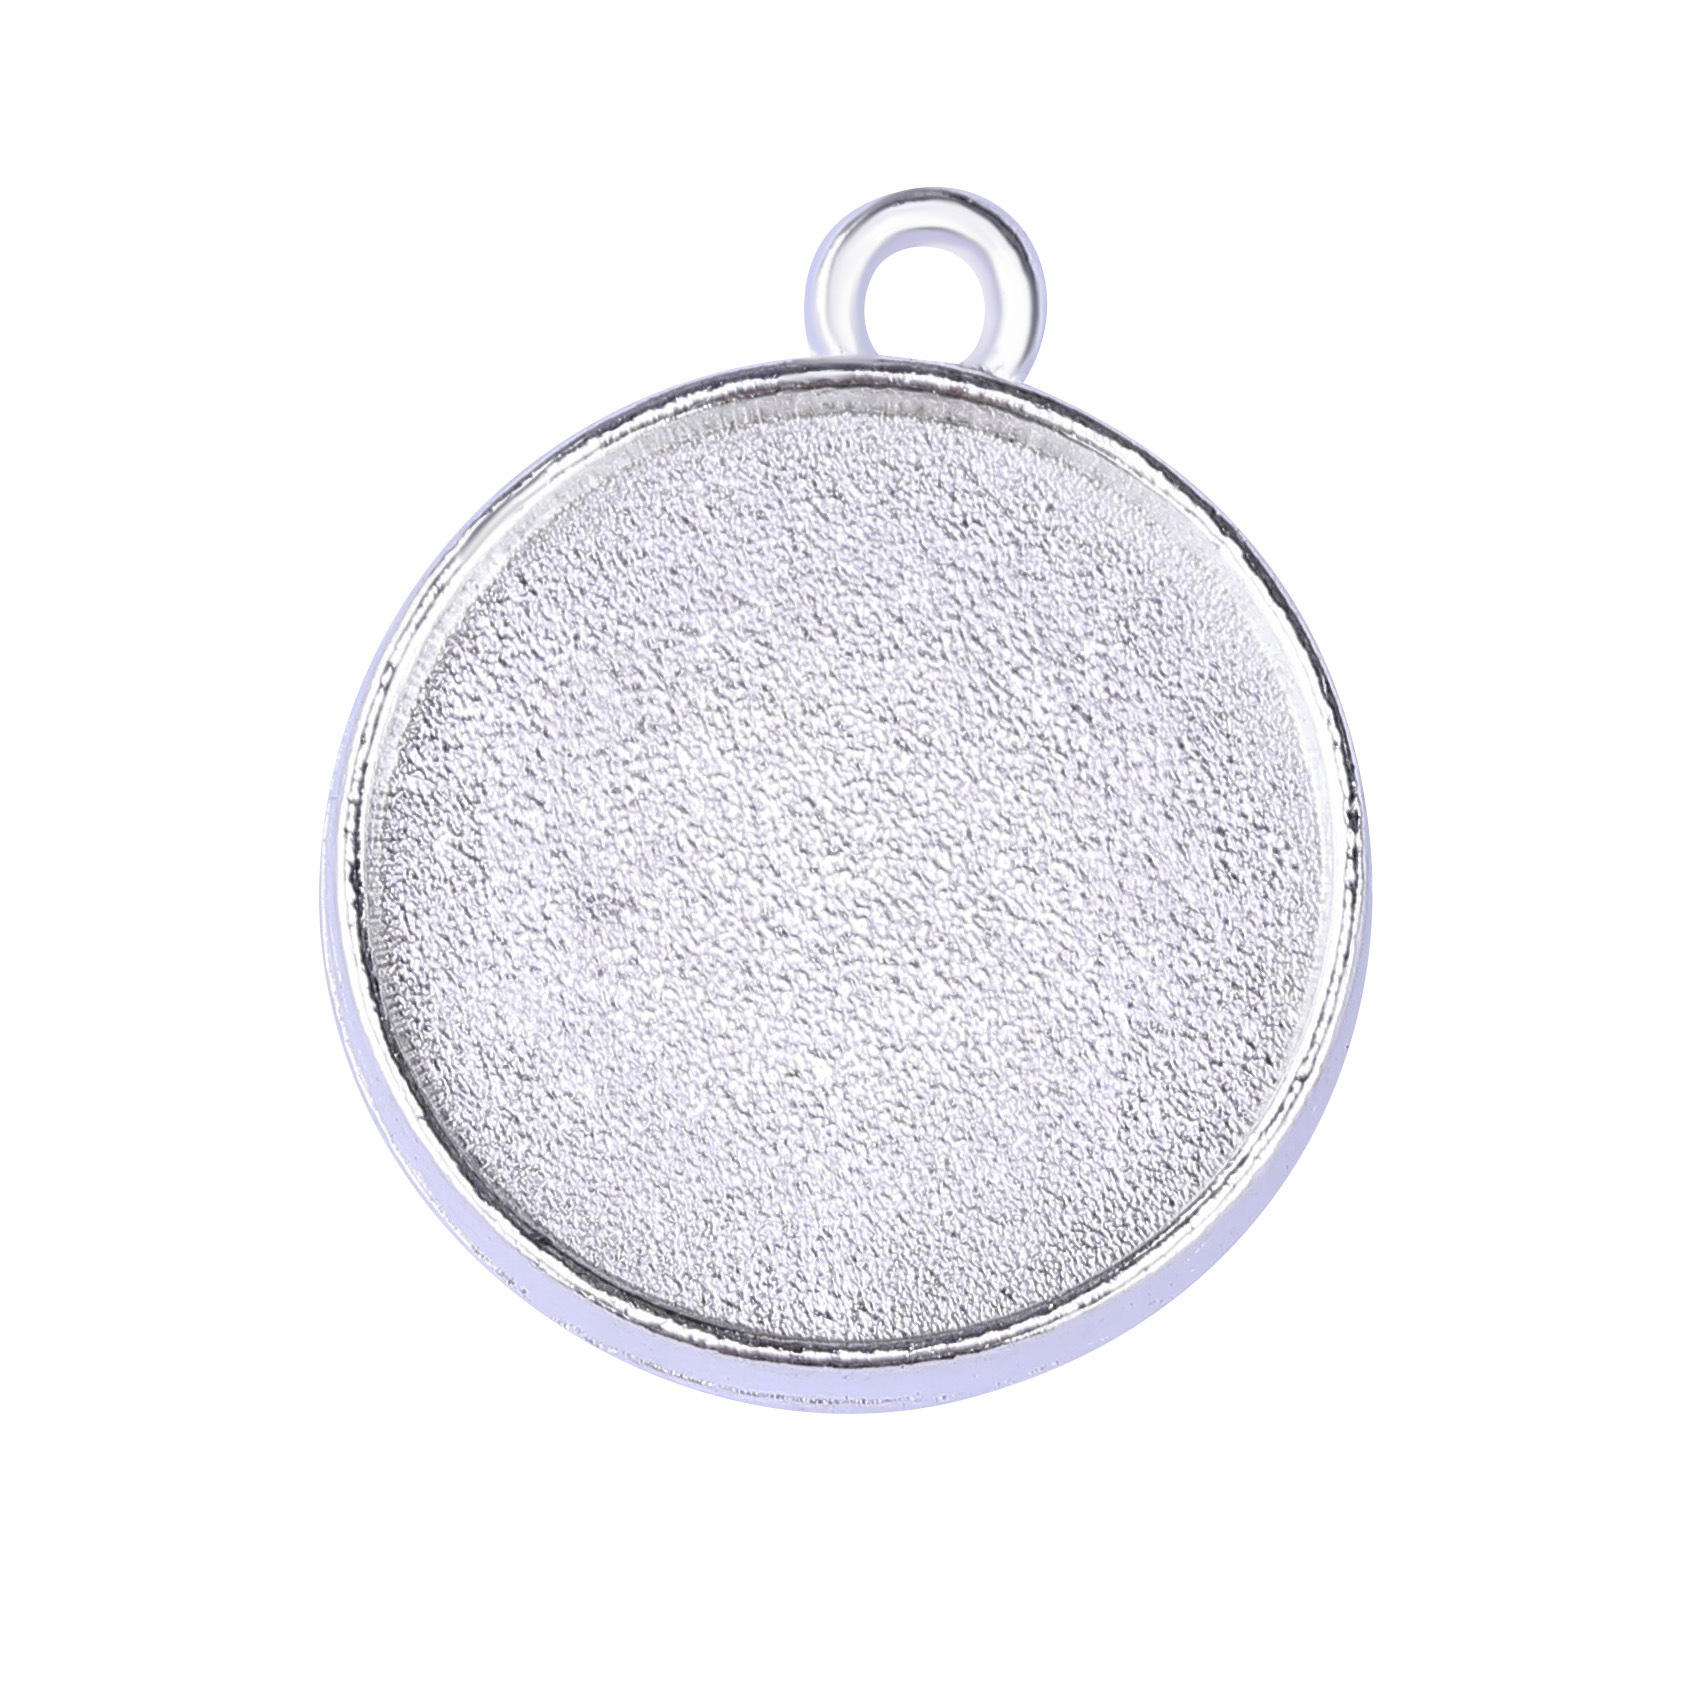 3:silver plated